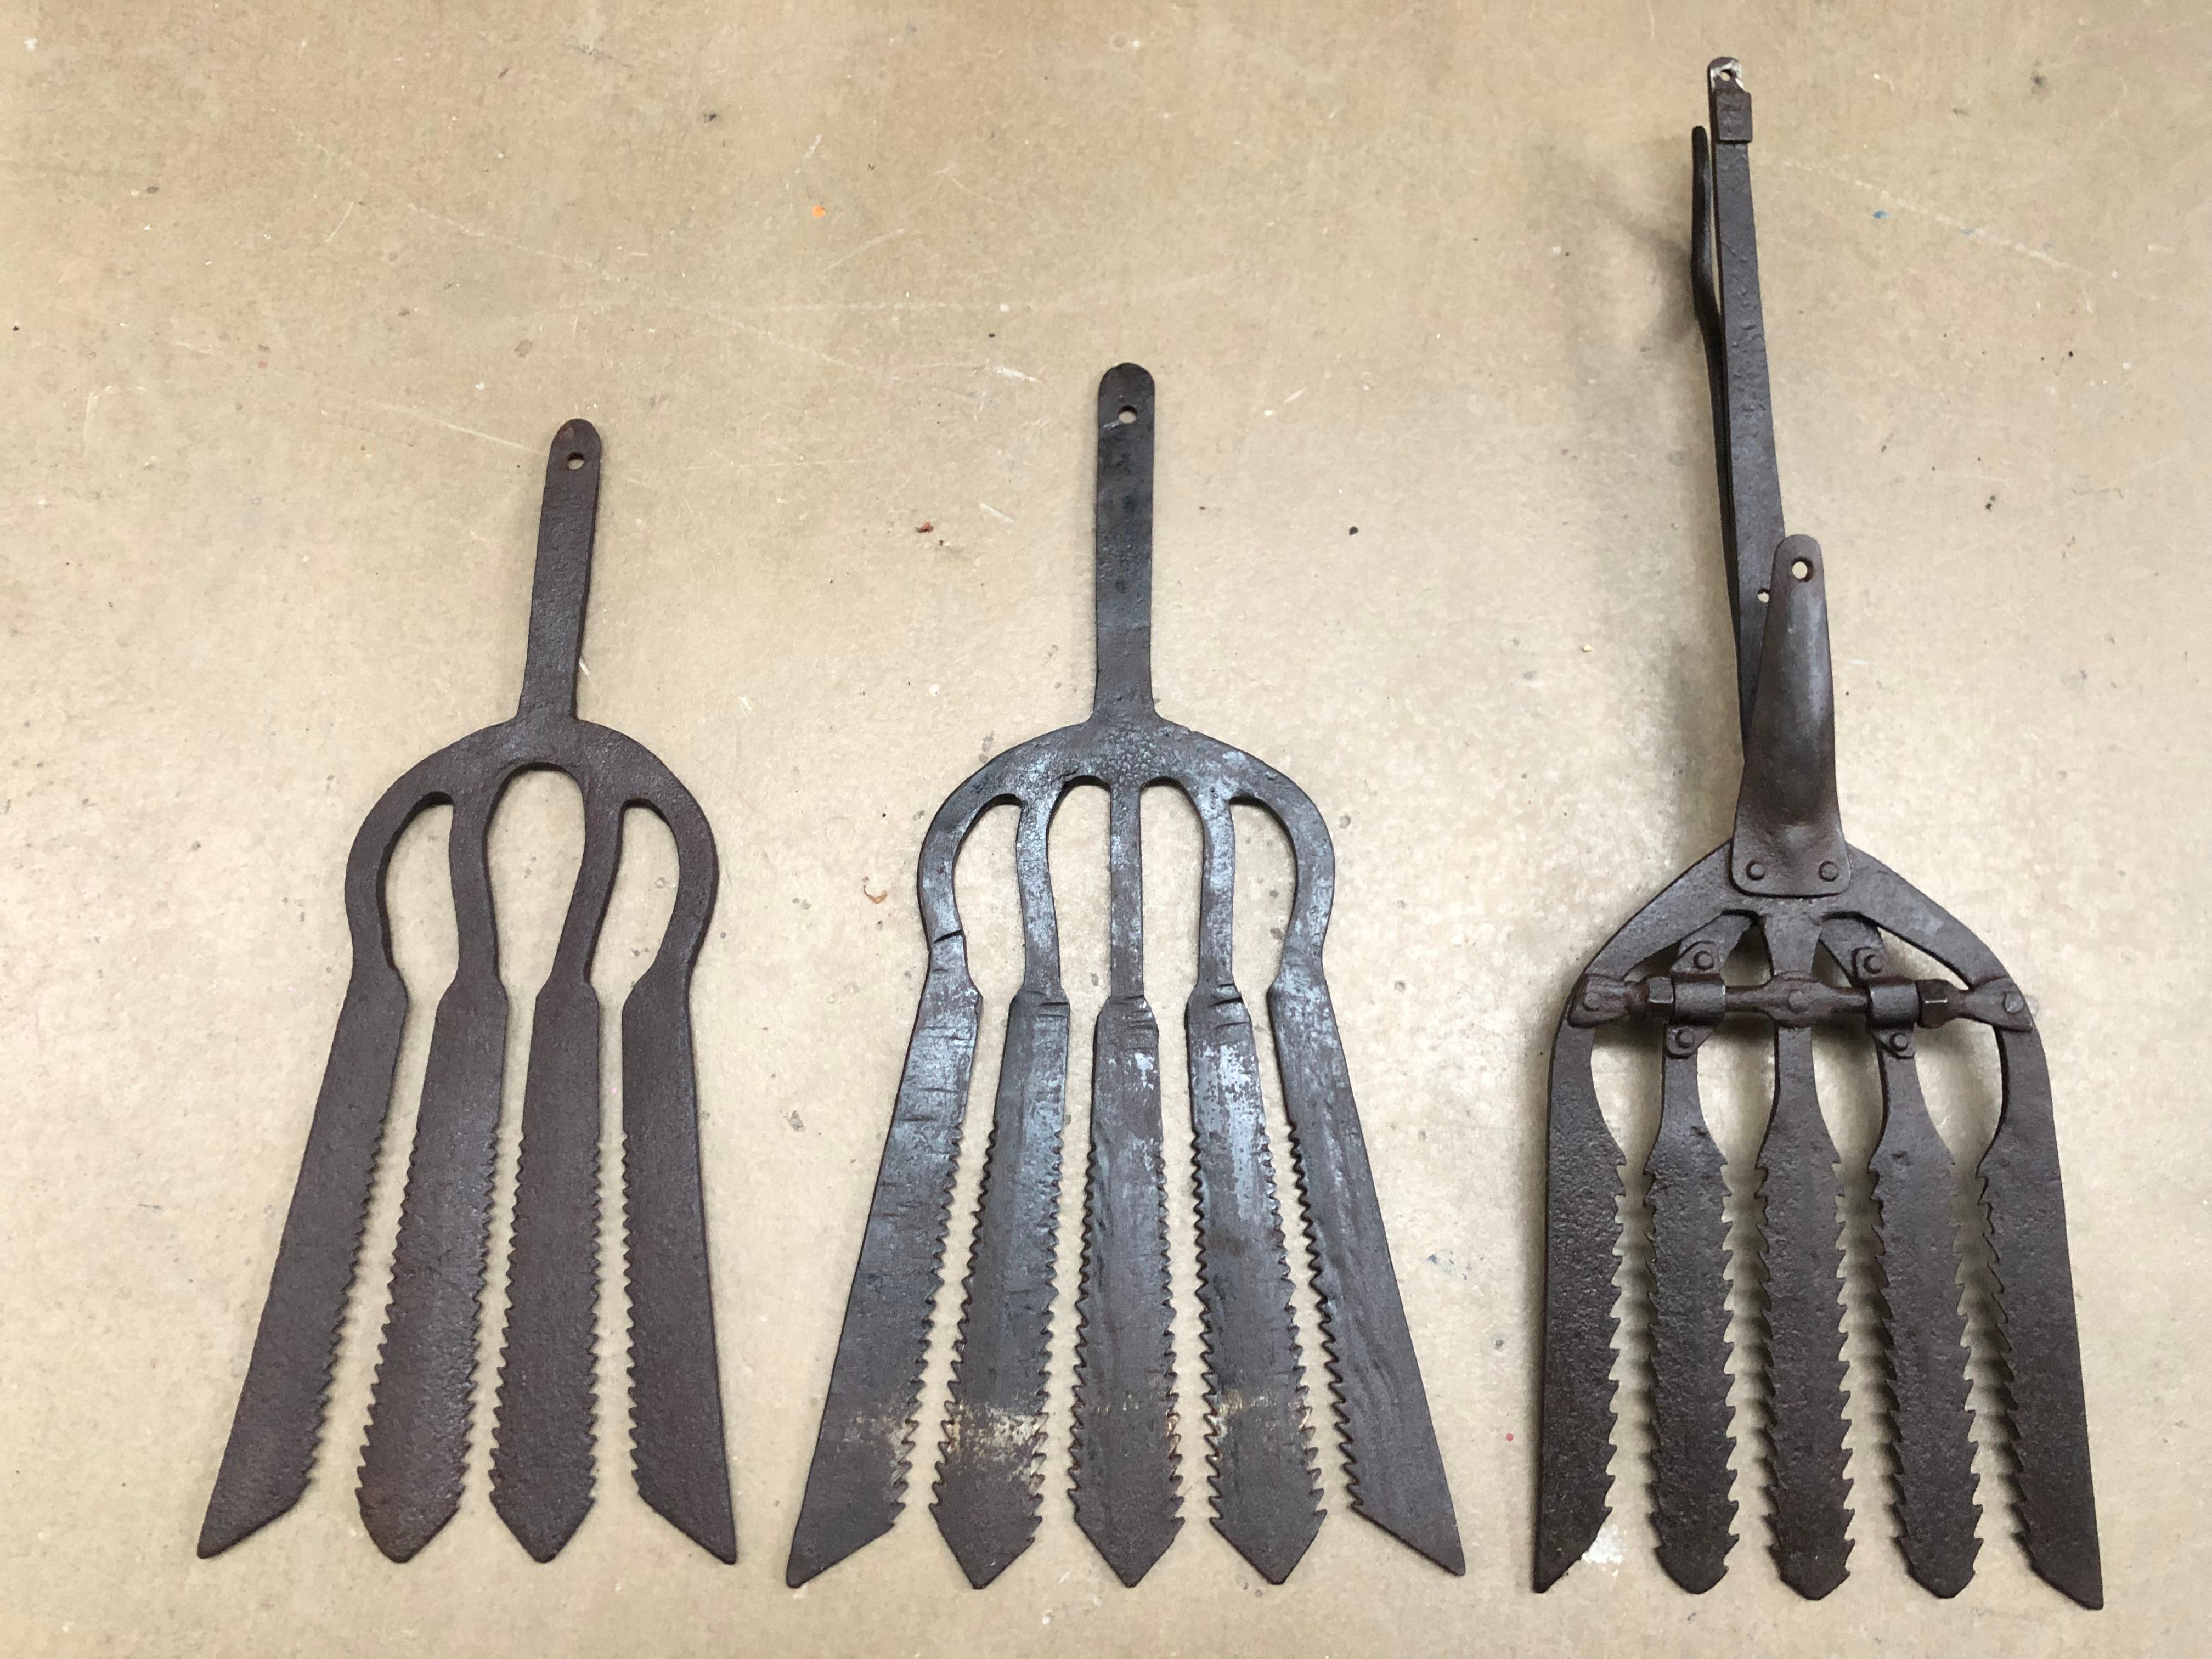 A collection of 3 wrought iron eel forks from the 18th century. 
Extremely decorative and each one unique. 
Each one is a work of art. 
Sizes vary from 41 cm to 58 cm. 
Would look amazing in a fish restaurant, bar, club or even in your home.
In